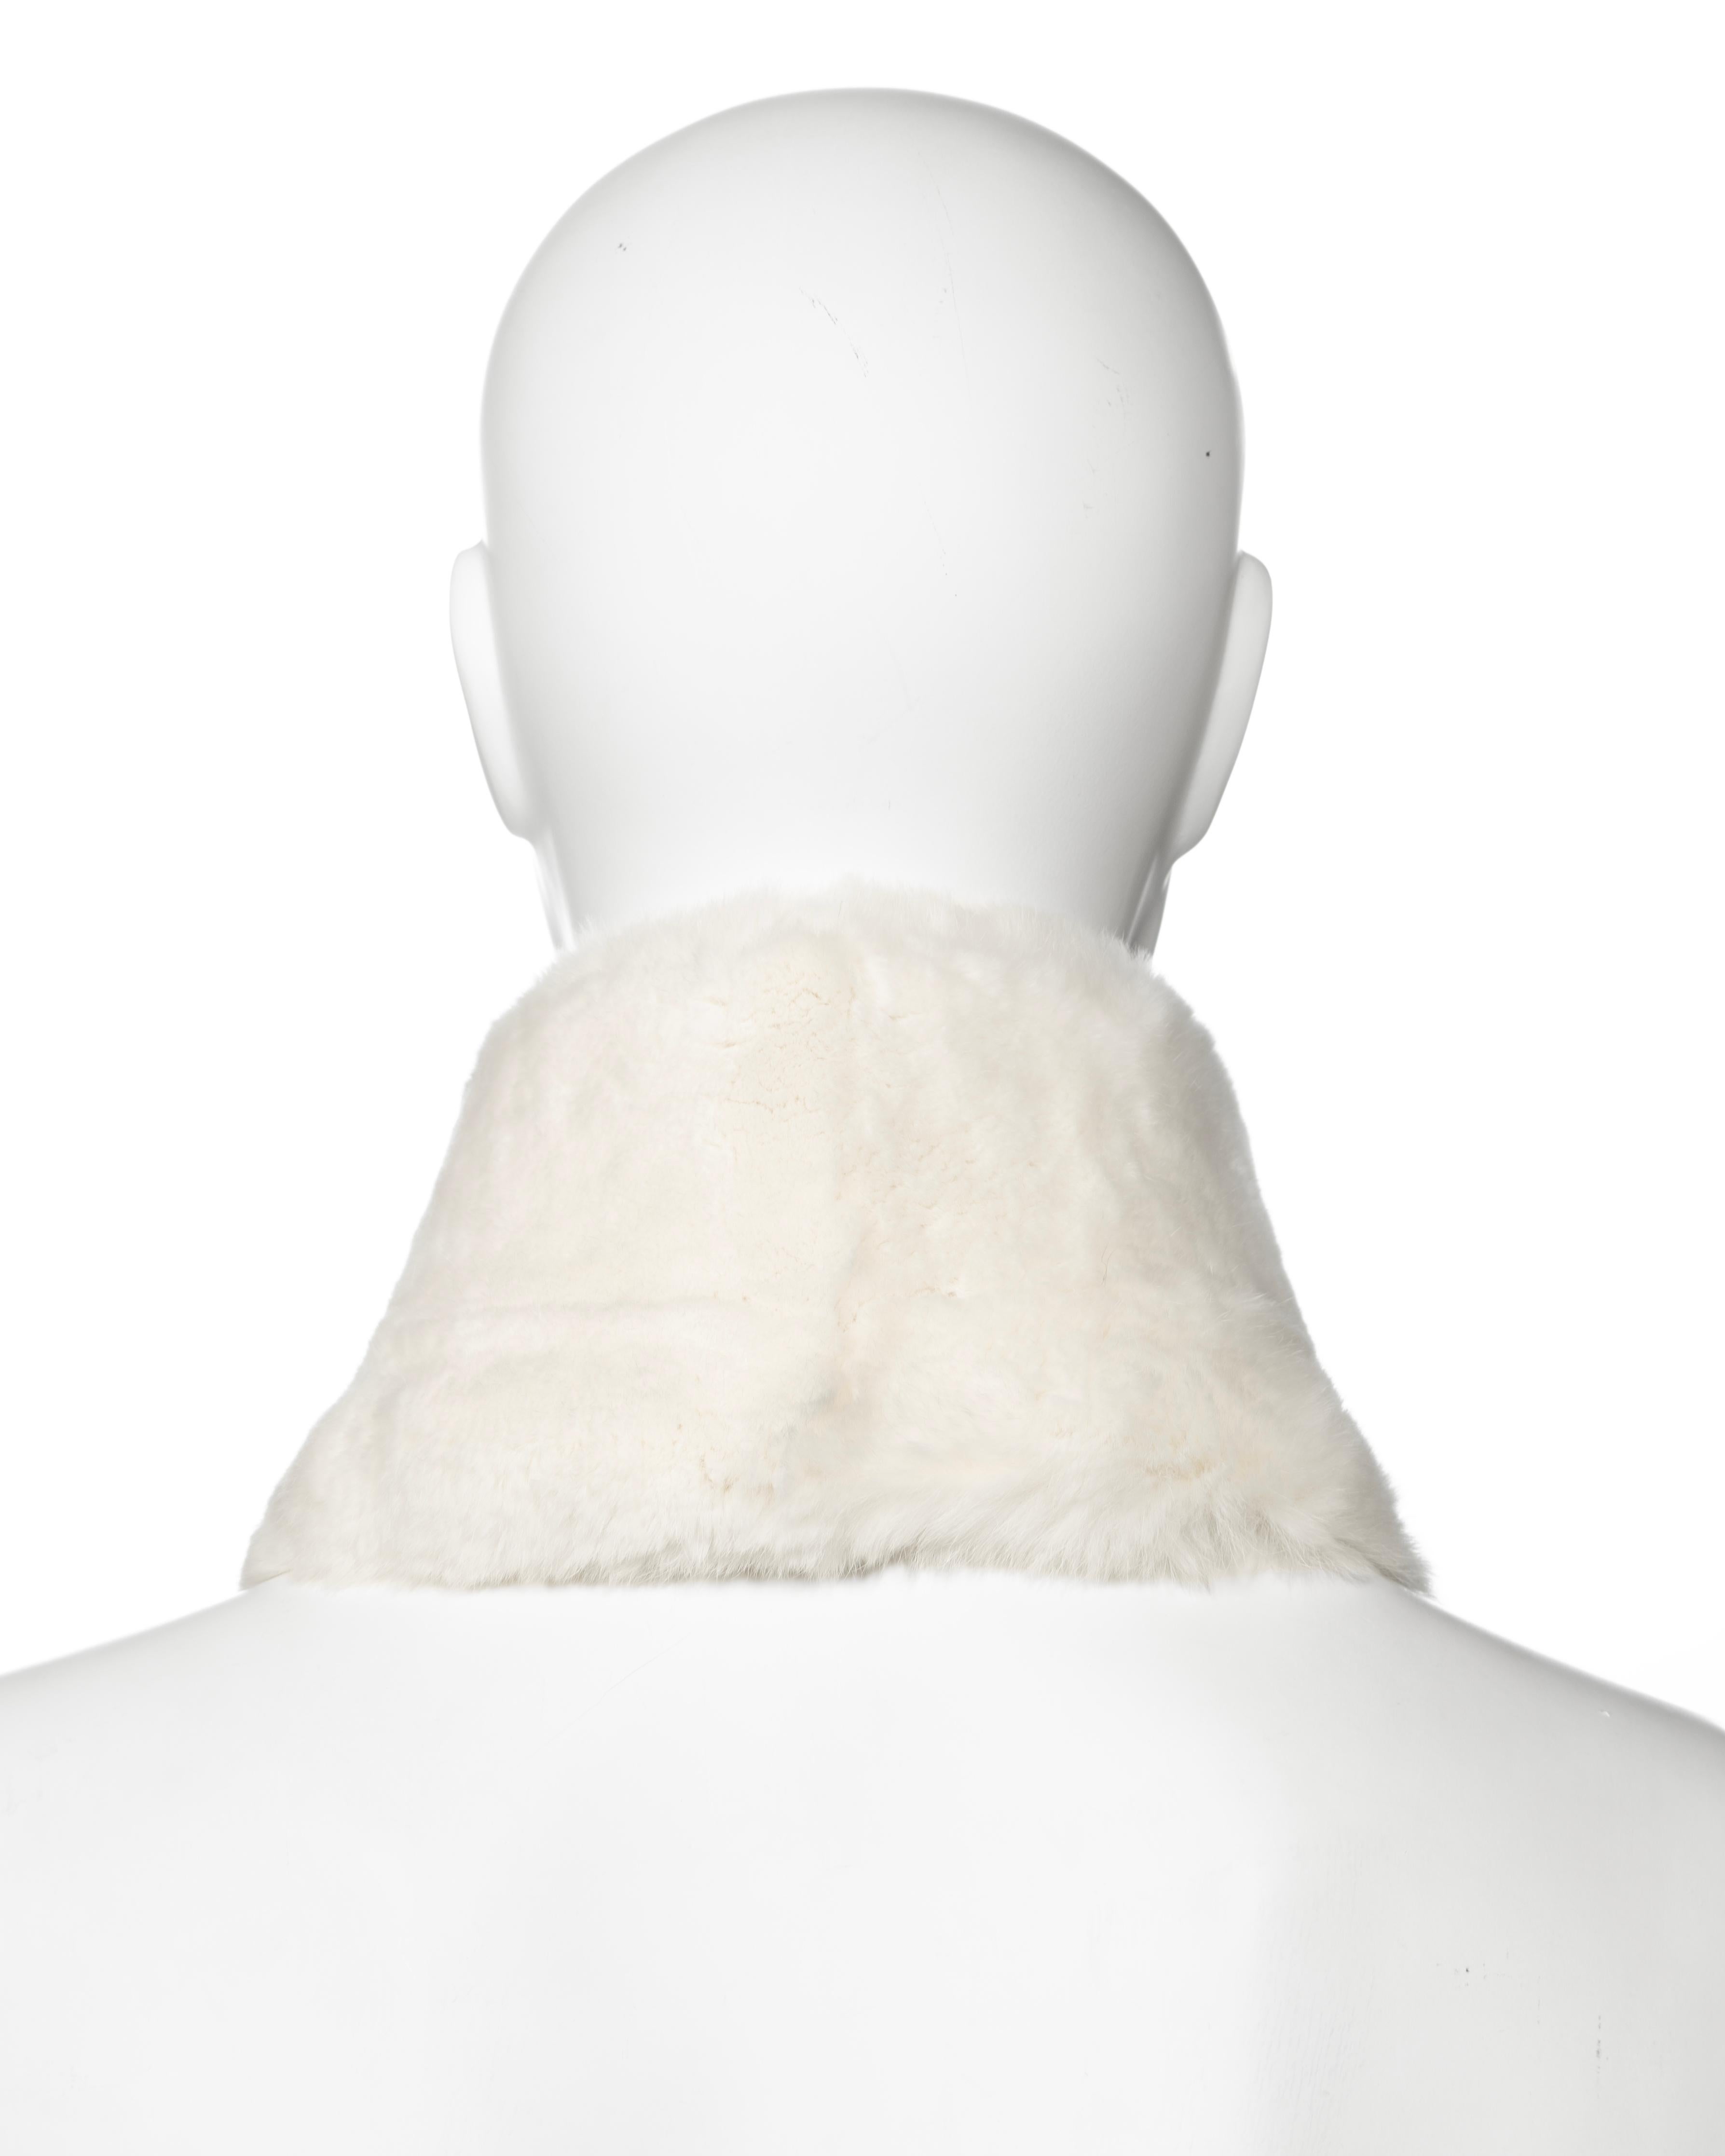 Chanel by Karl Lagerfeld White Rabbit Fur Collar and Cuffs, fw 2003 For Sale 10